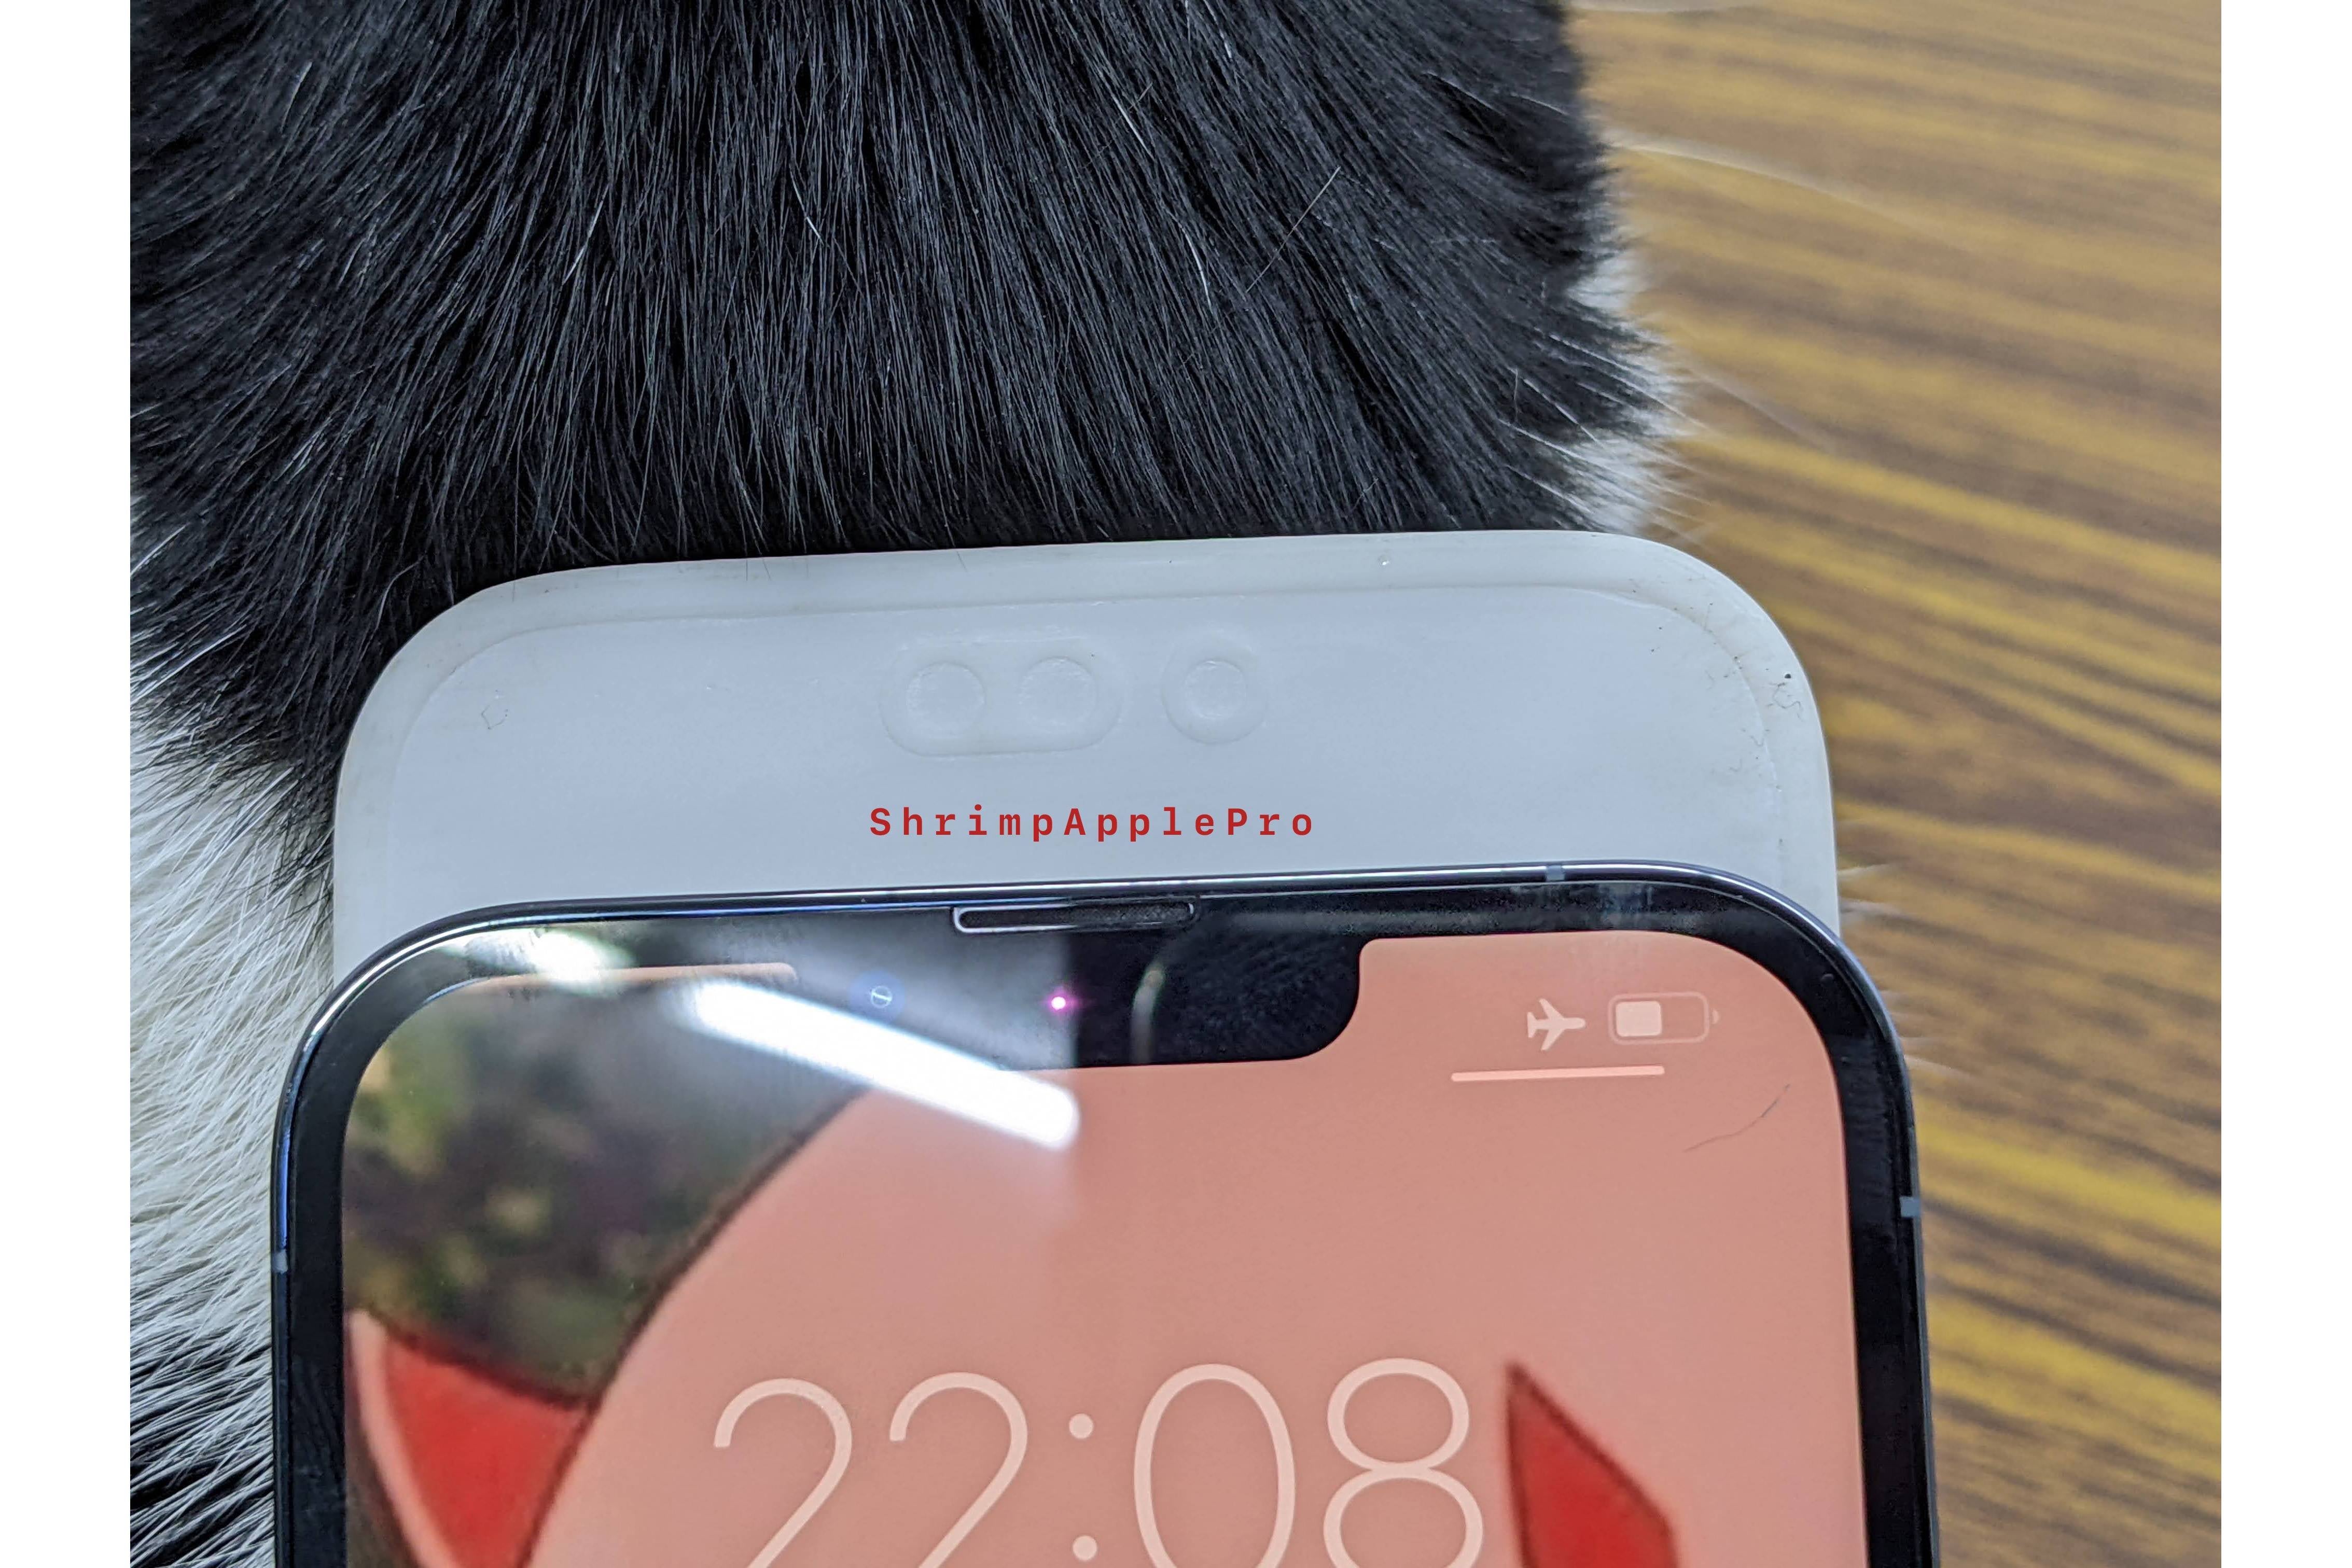 iPhone 14 Pro Max's cutouts appear to be bigger than most users would like - New dummy unit shows how big the cutouts on iPhone 14 Pro Max could be